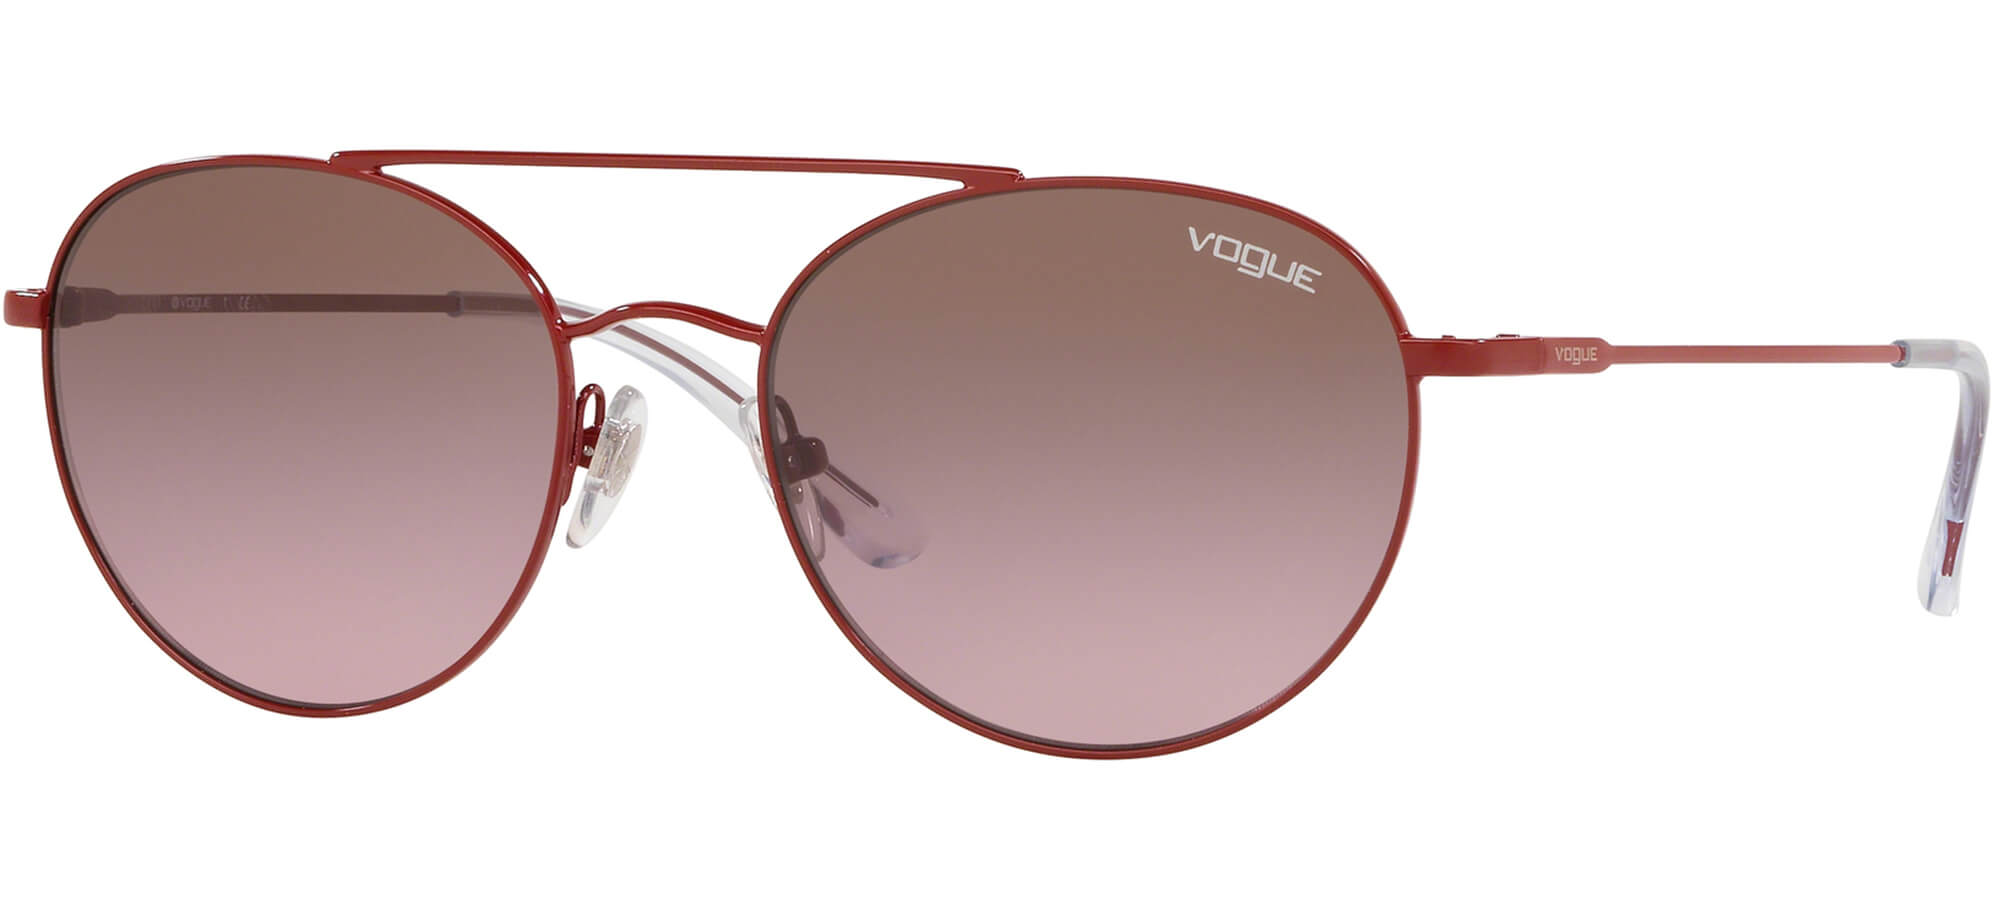 VogueVO 4129SRed/brown Pink Shaded (5110/14)